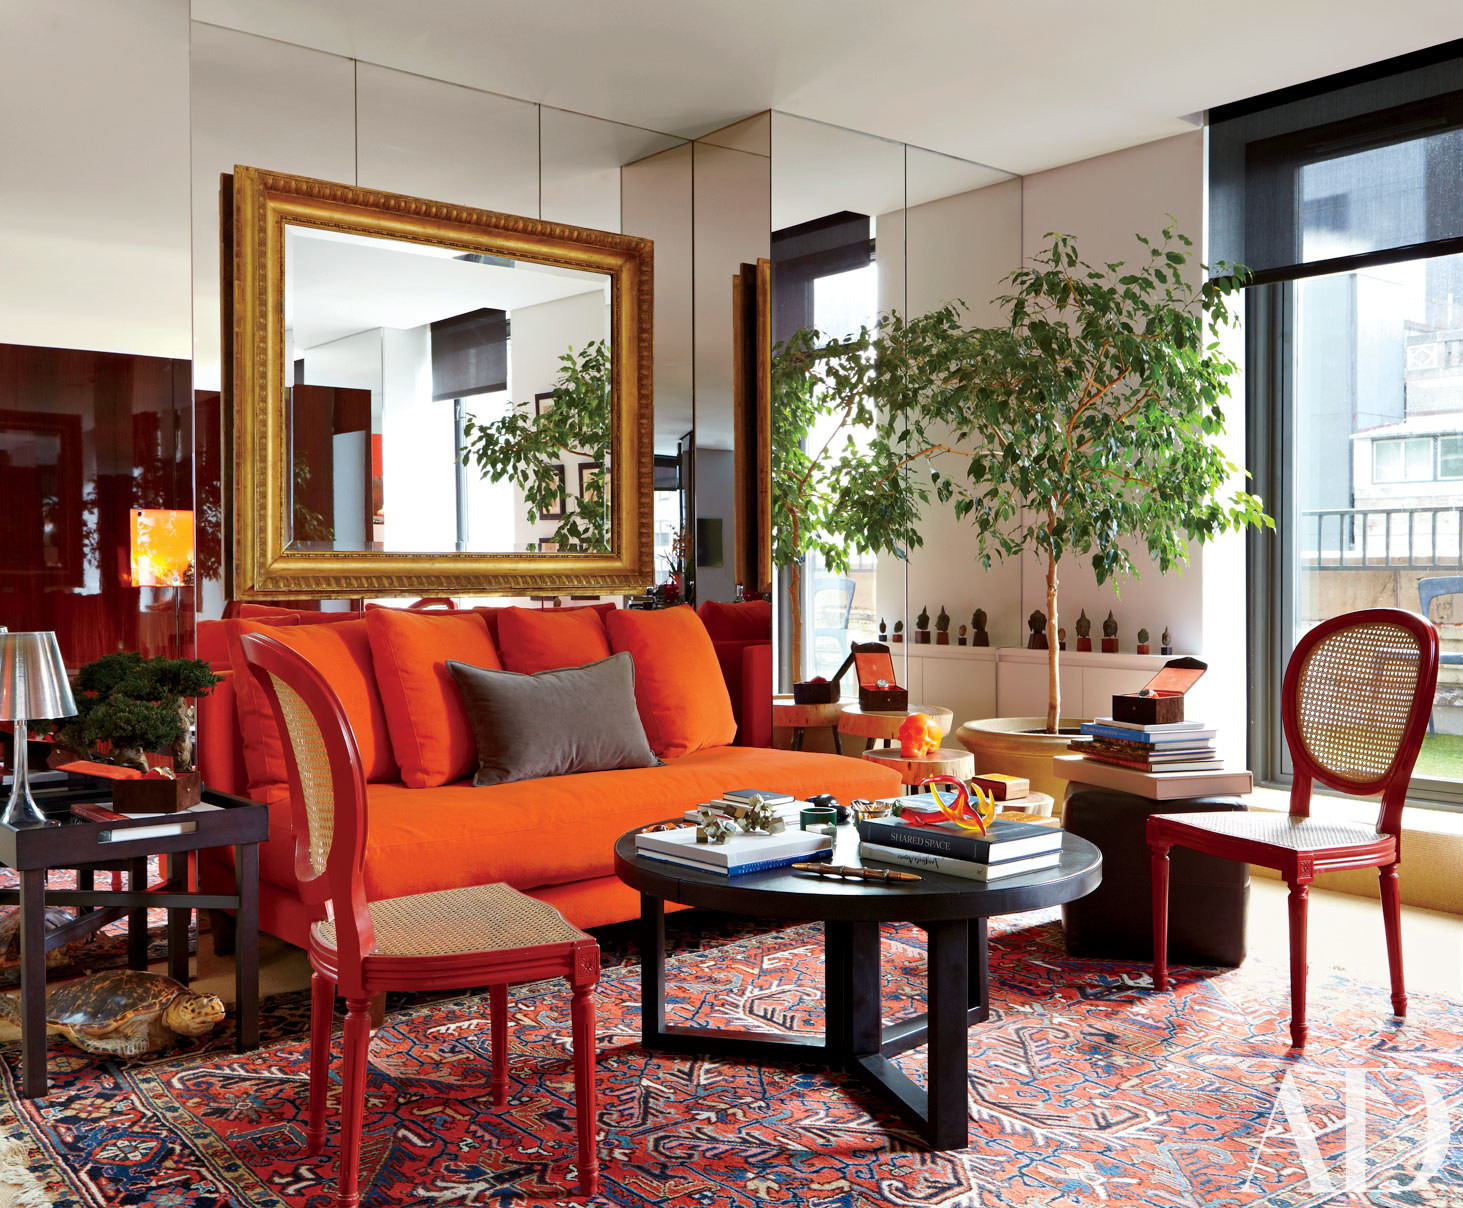 Colorful Living Room Ideas
 Inspirations & Ideas Living Room Ideas with Fall Colors